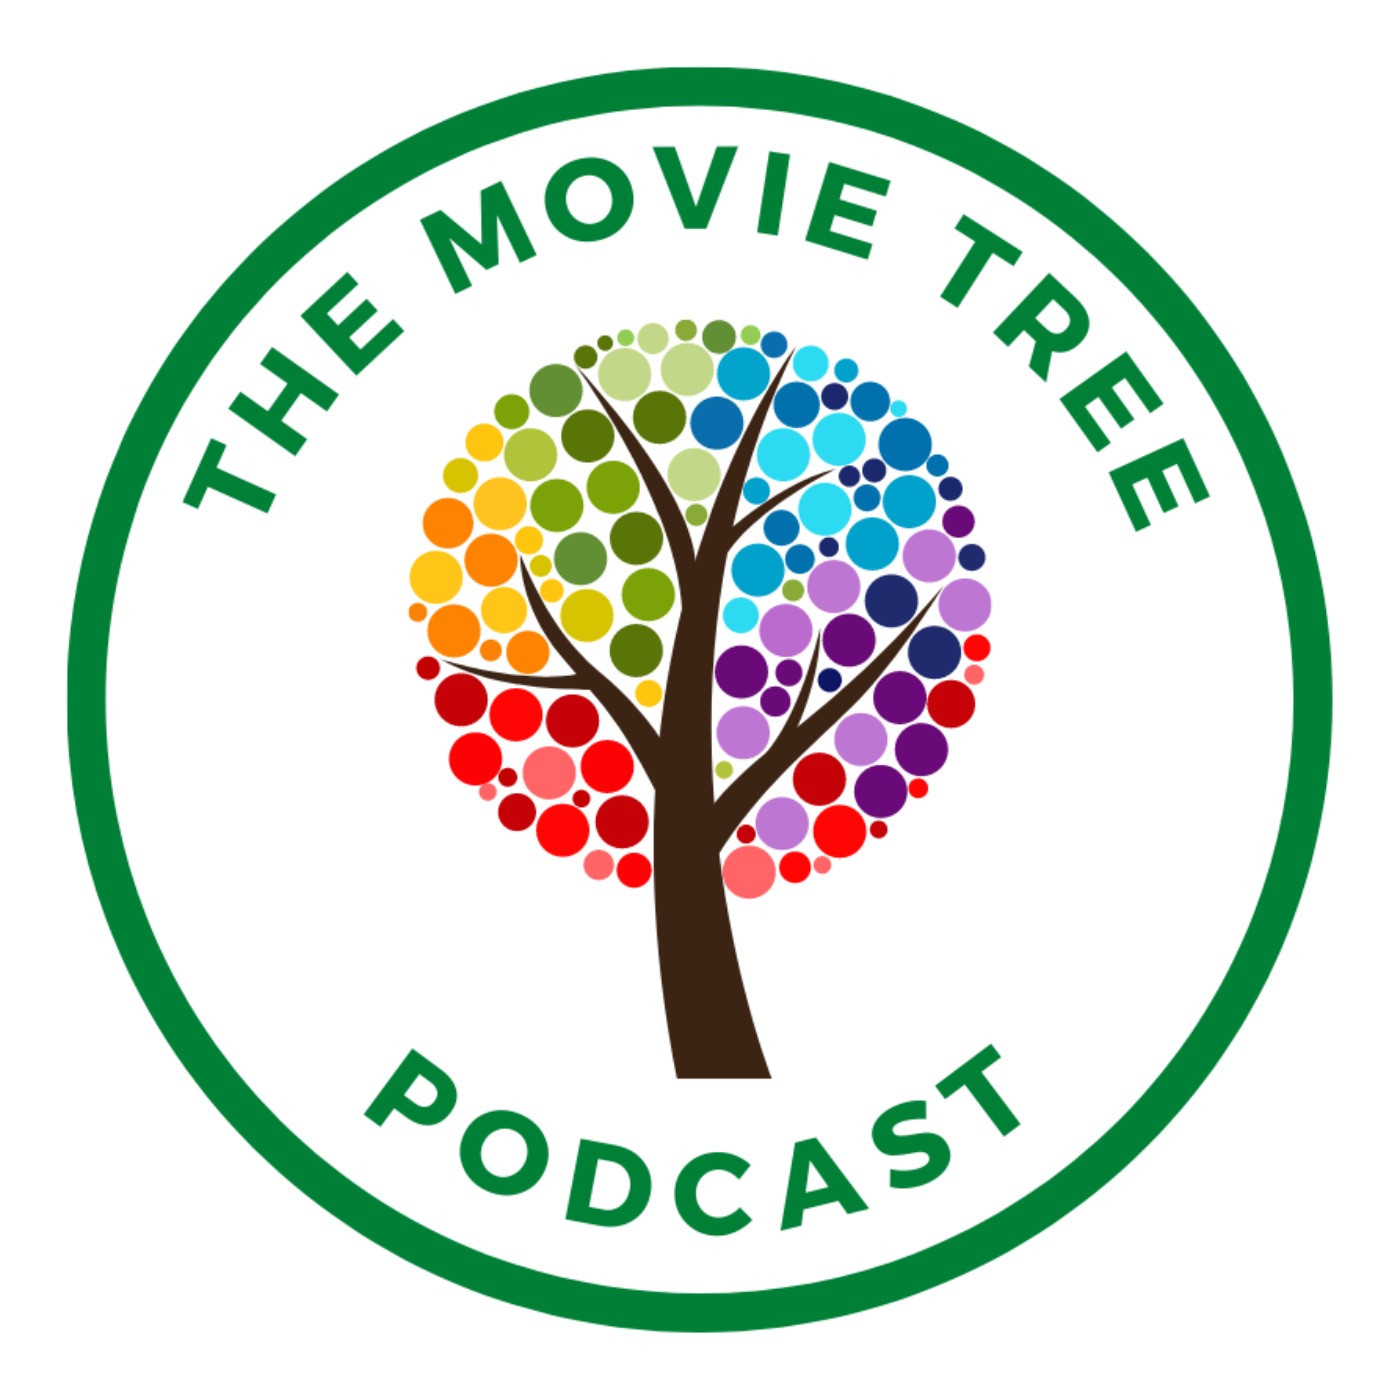 Episode 106 - THE LAST OF THE MOHICANS